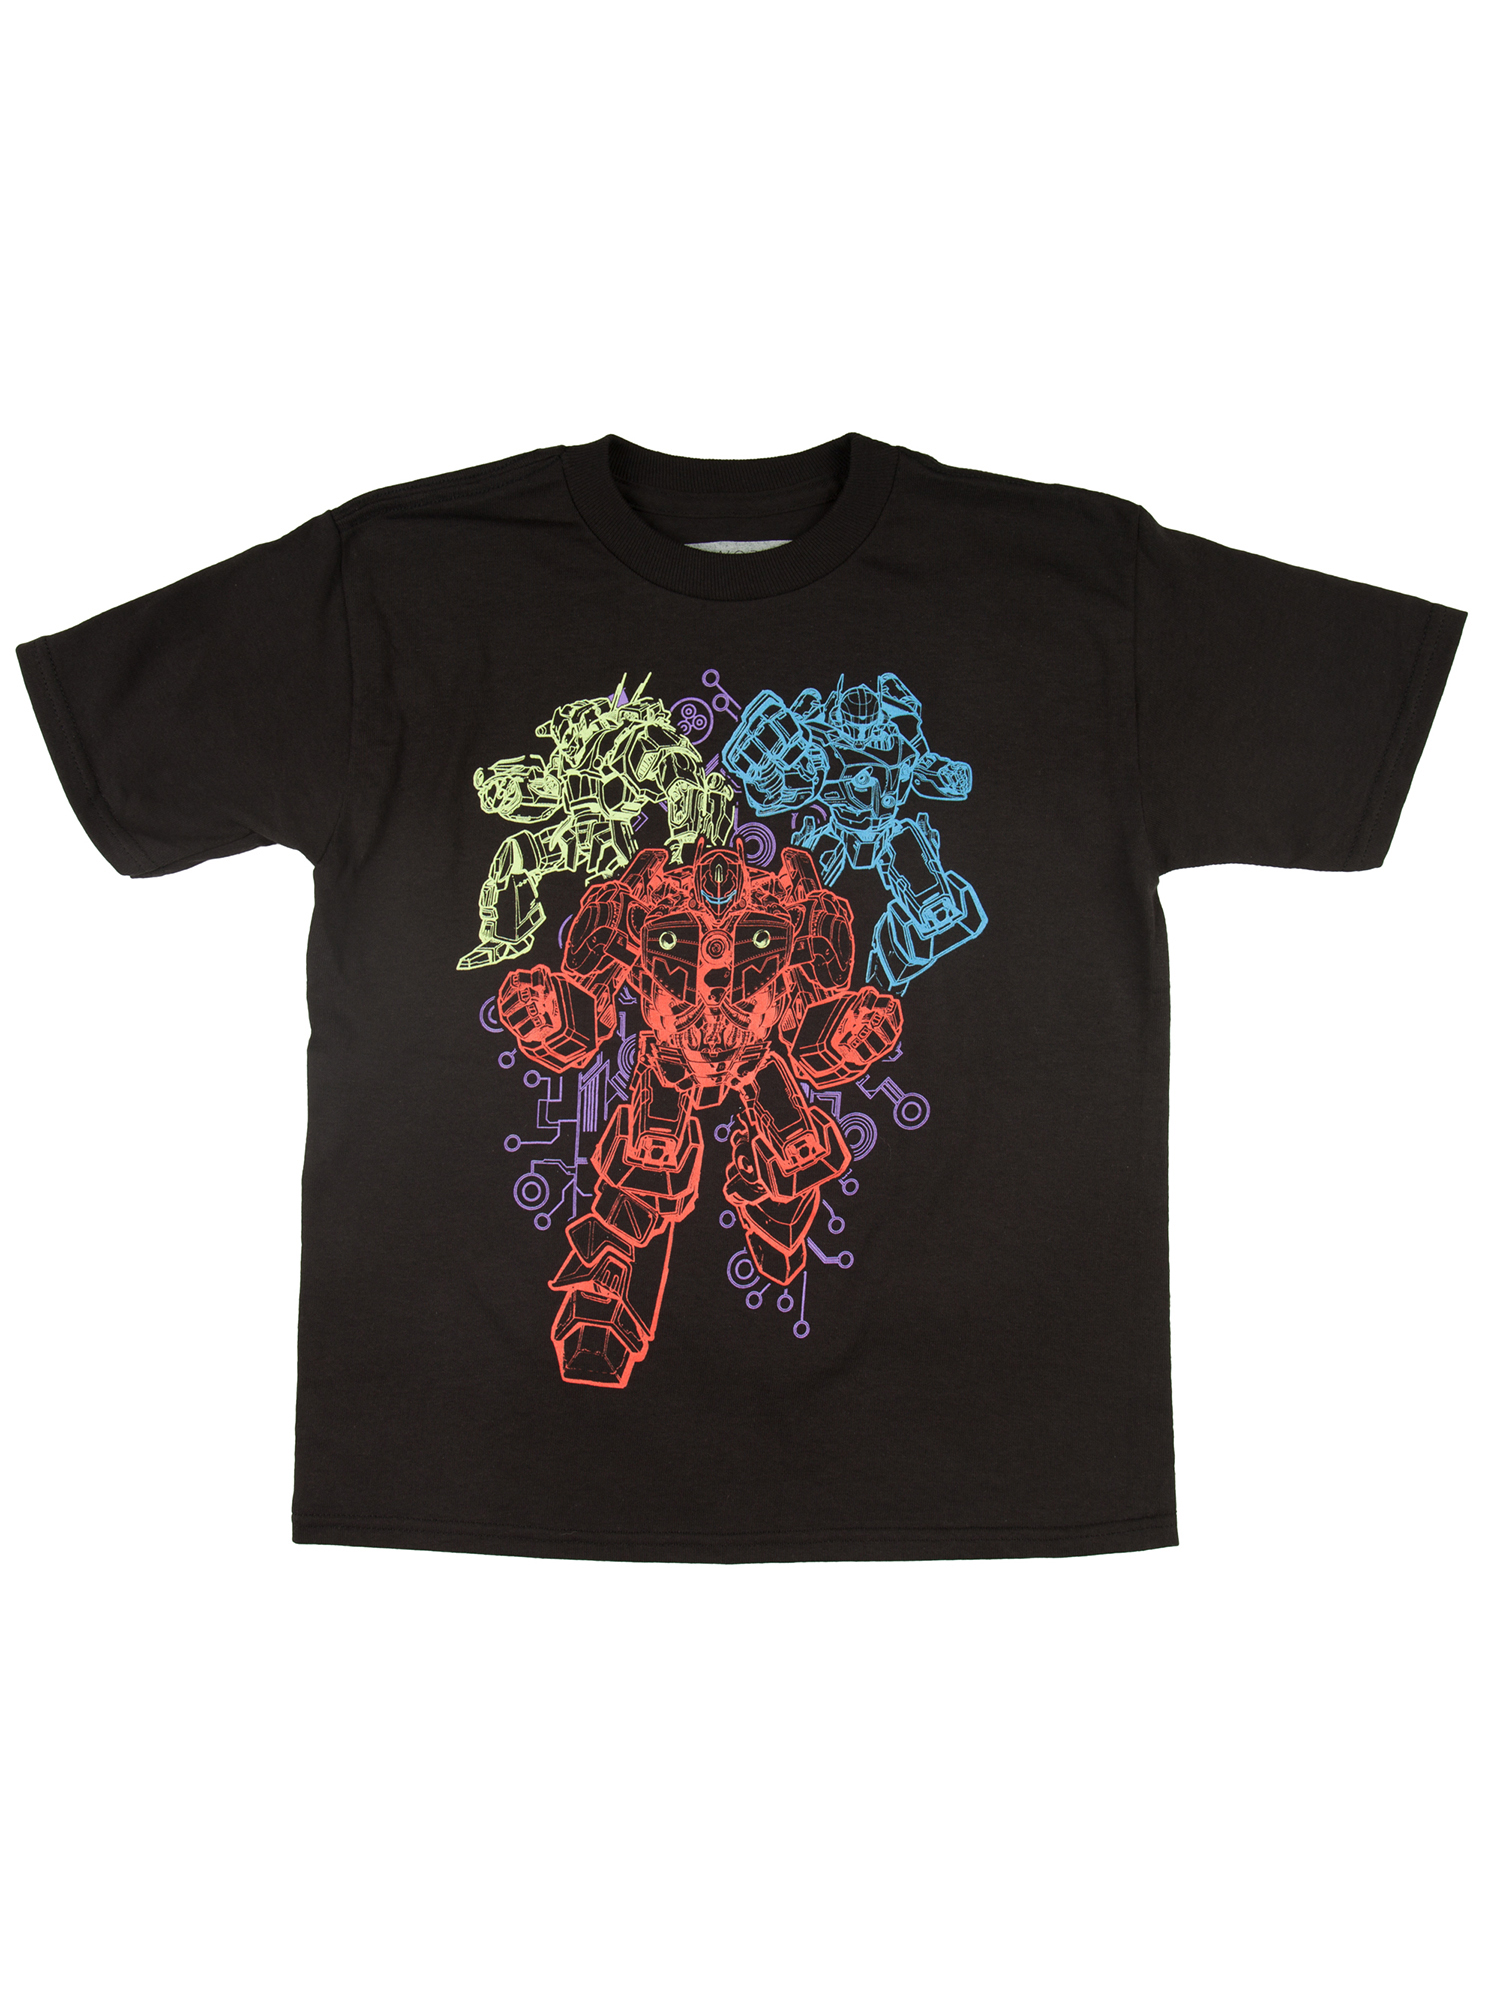 Bioworld Glow-In-The-Dark Ultrabot Black Short Sleeve Graphic T-Shirt Including Robot Toy Gift With Purchase (Little Boys & Big Boys) - image 2 of 3